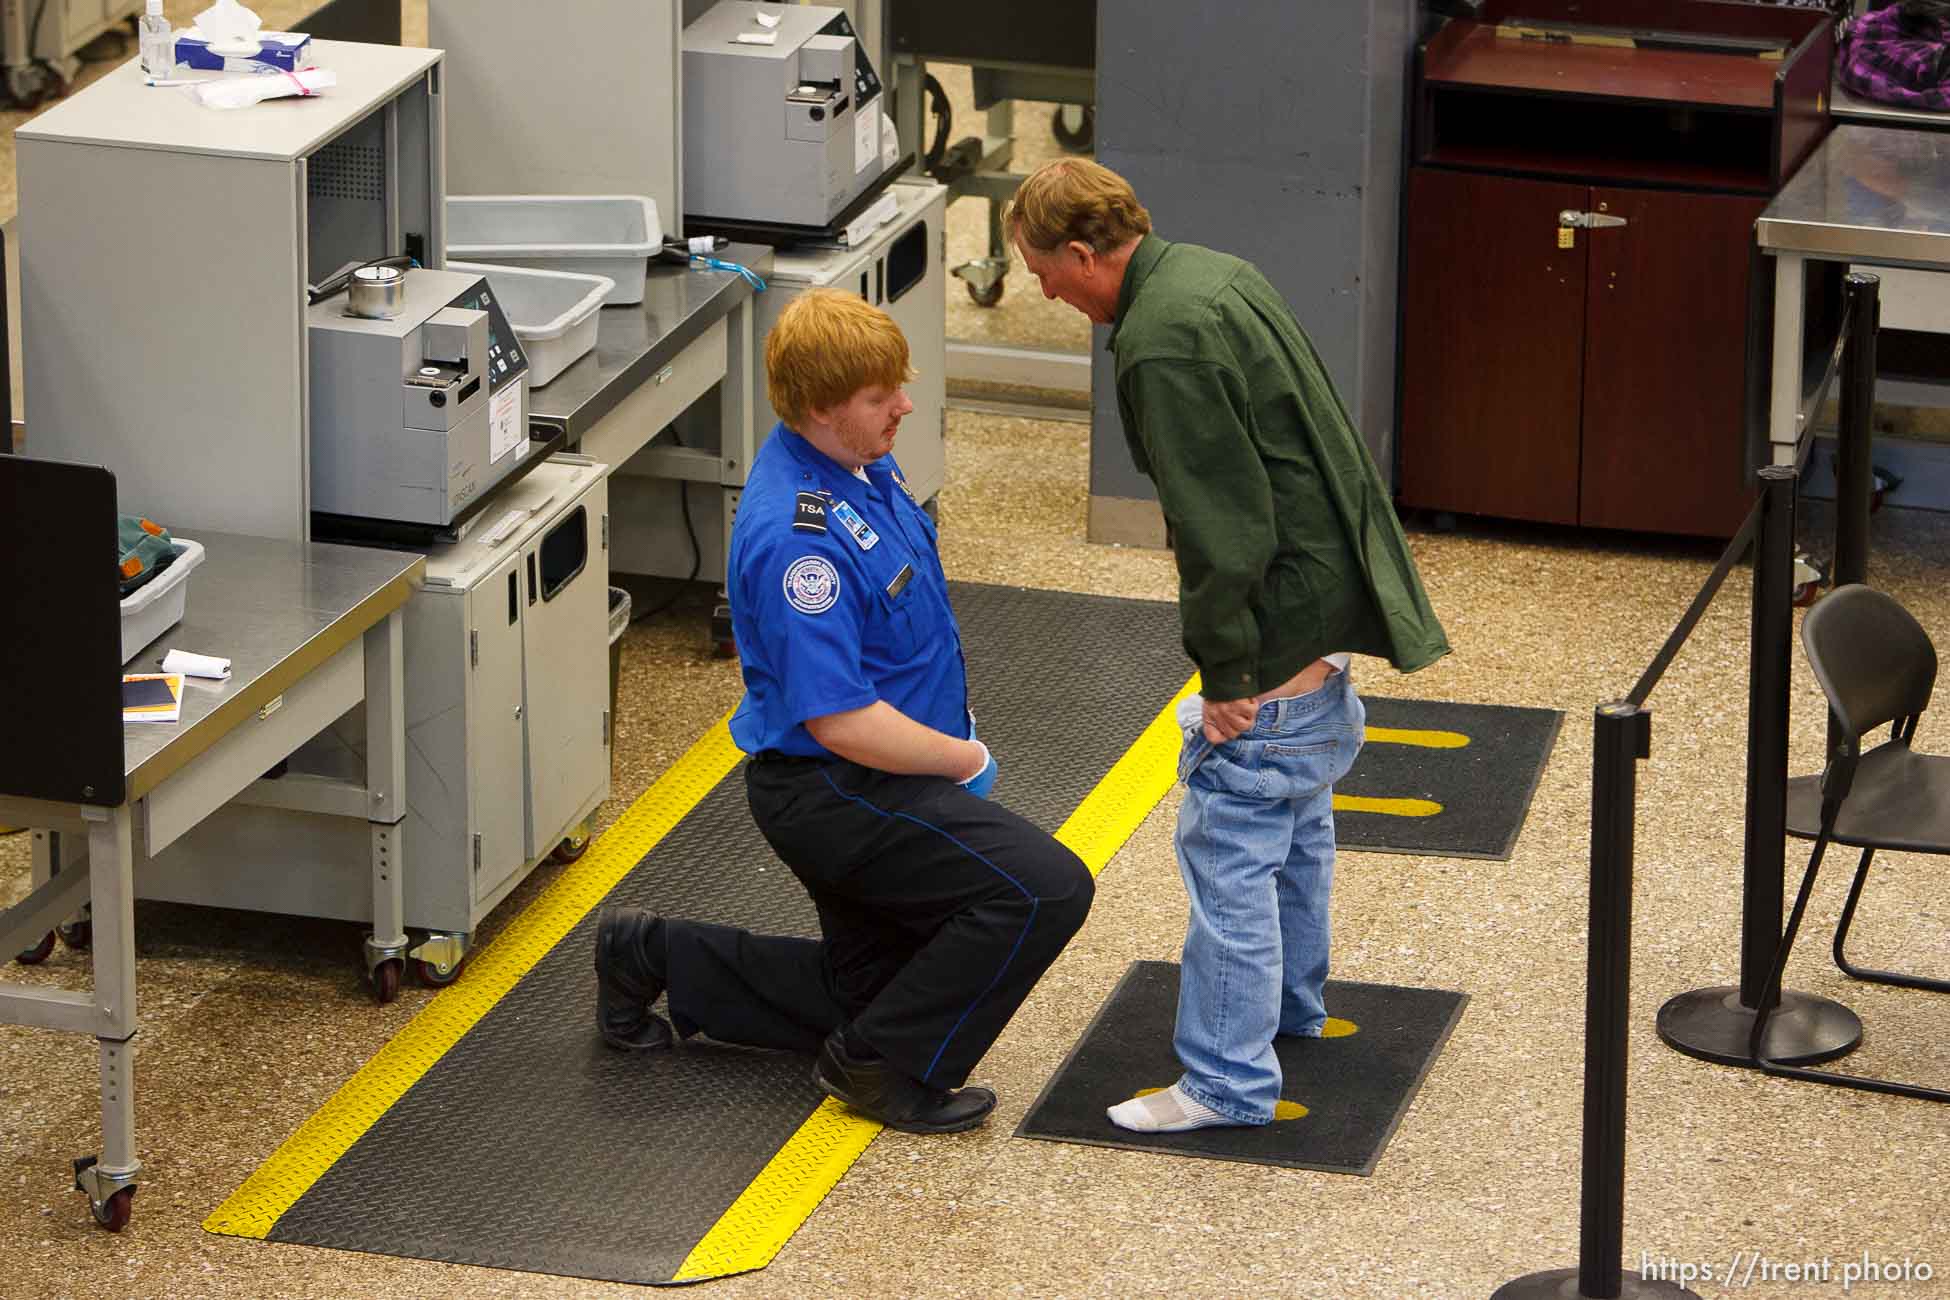 Frustrated Traveller Pulls Down his Pants for TSA